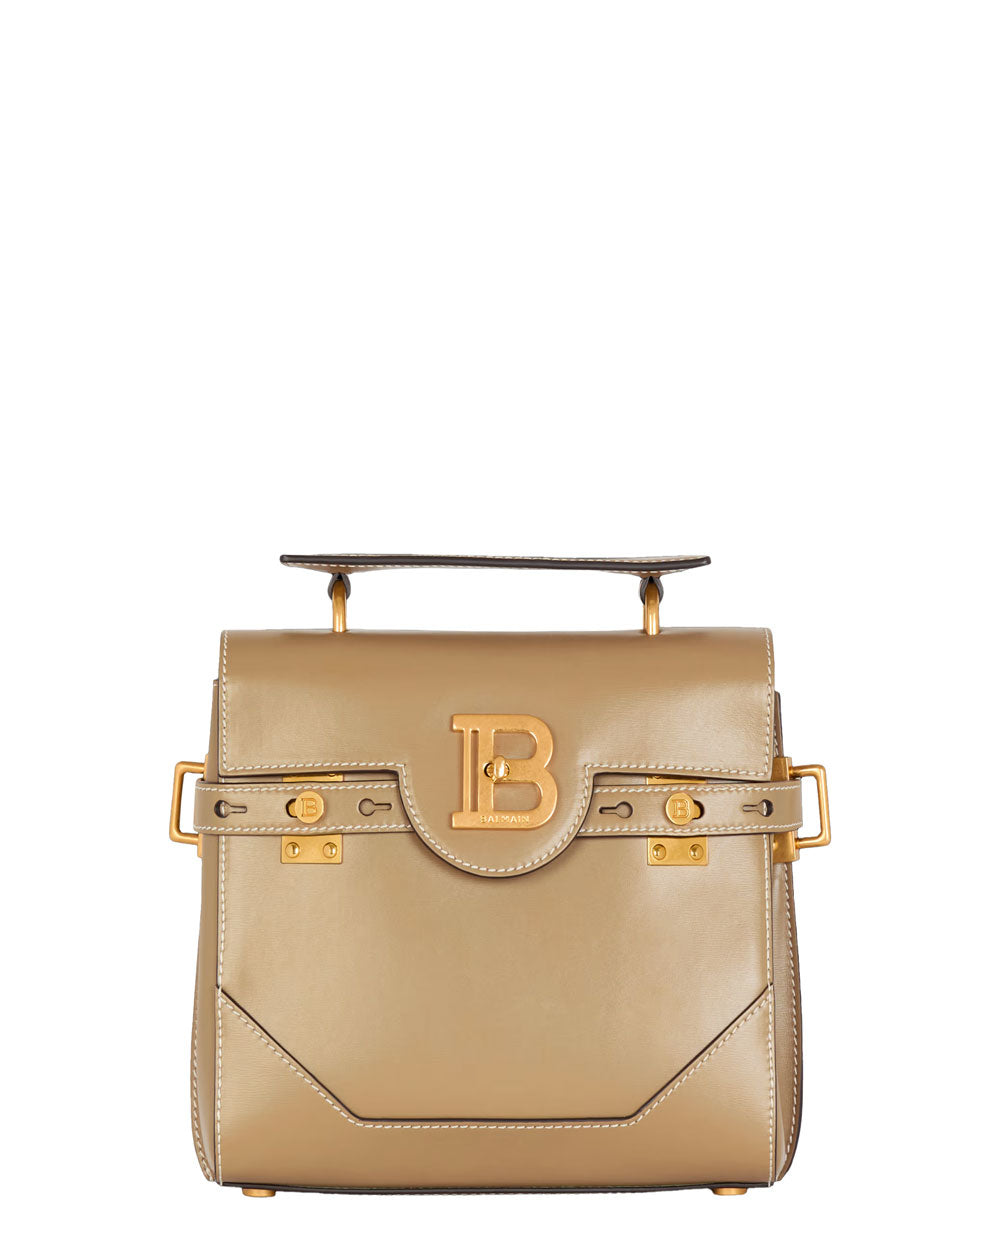 B-Buzz 23 Bag in Taupe